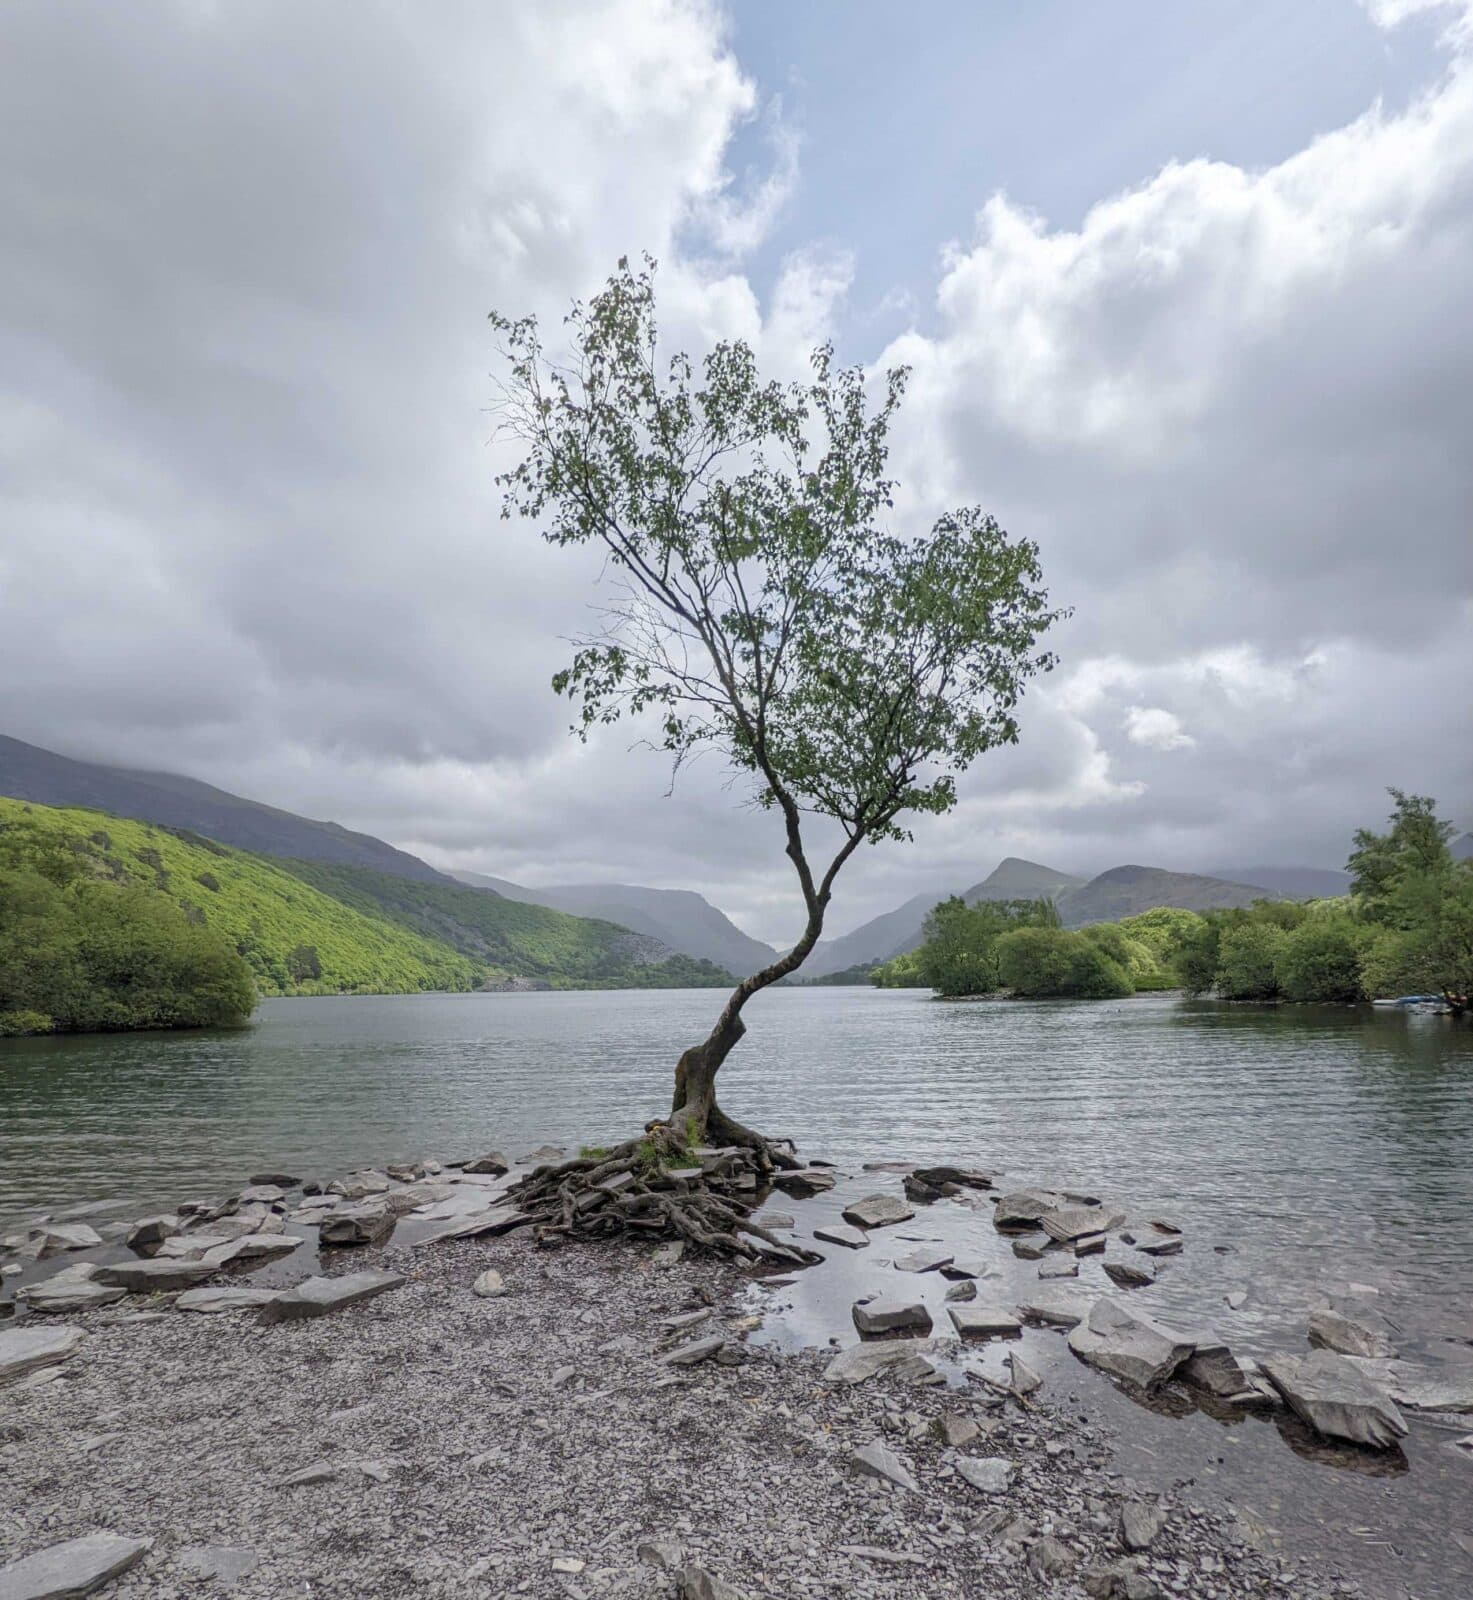 A photo of the Lonely Tree - Llyn Padarn